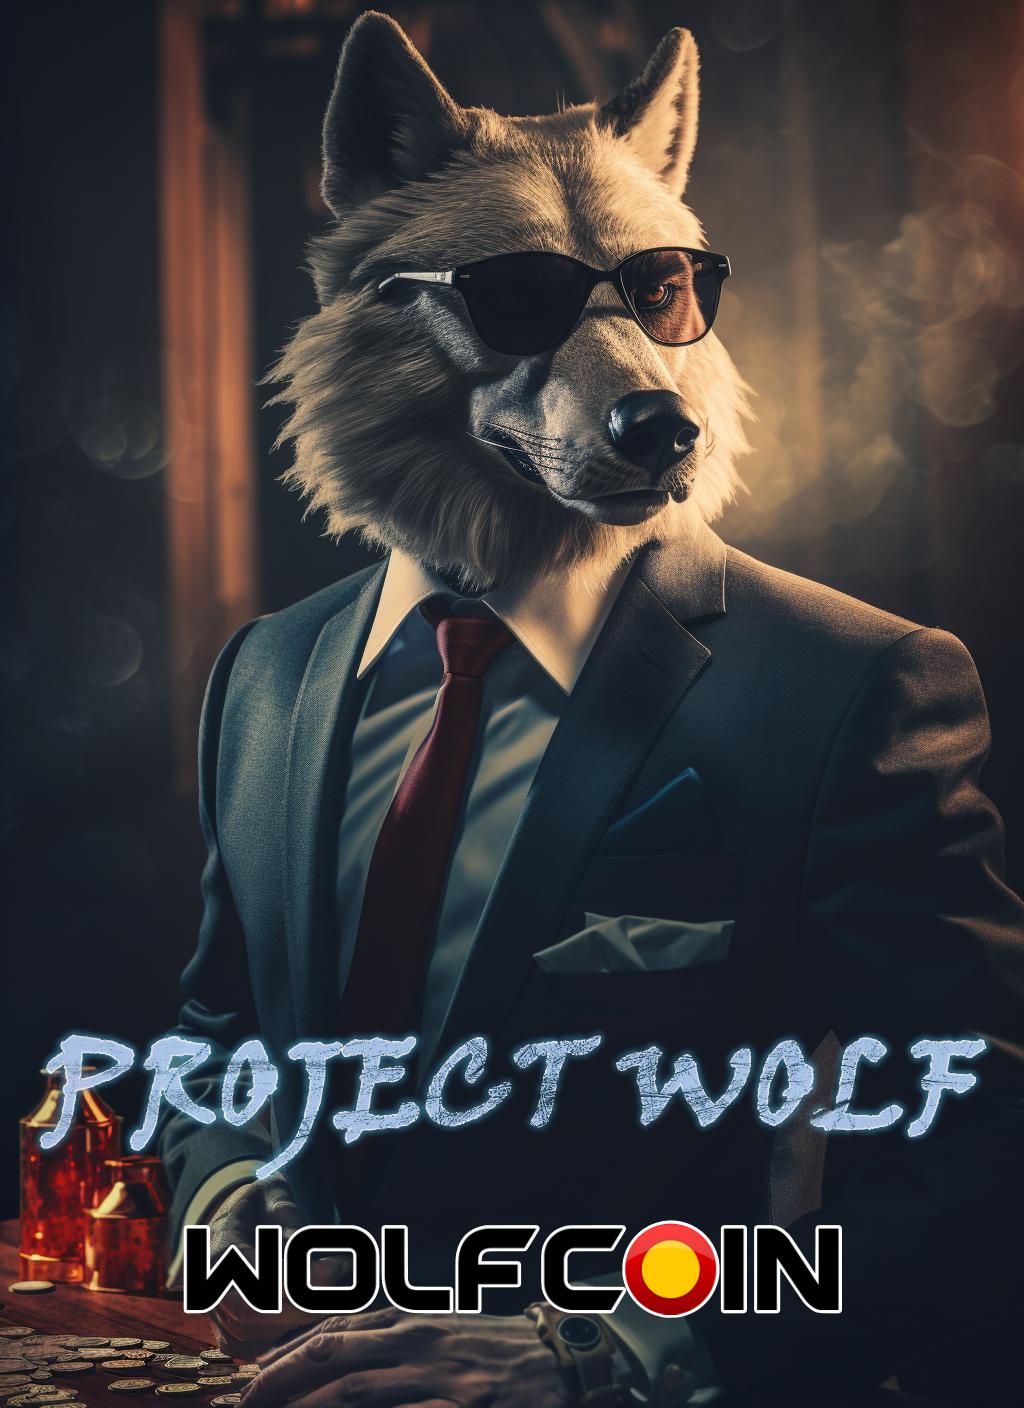 storm2day_Attracting_Wolf-faced_Investors_HD_4K_e801ee92-5b29-42f7-bb71-24b41a7c68ab.png.jpg